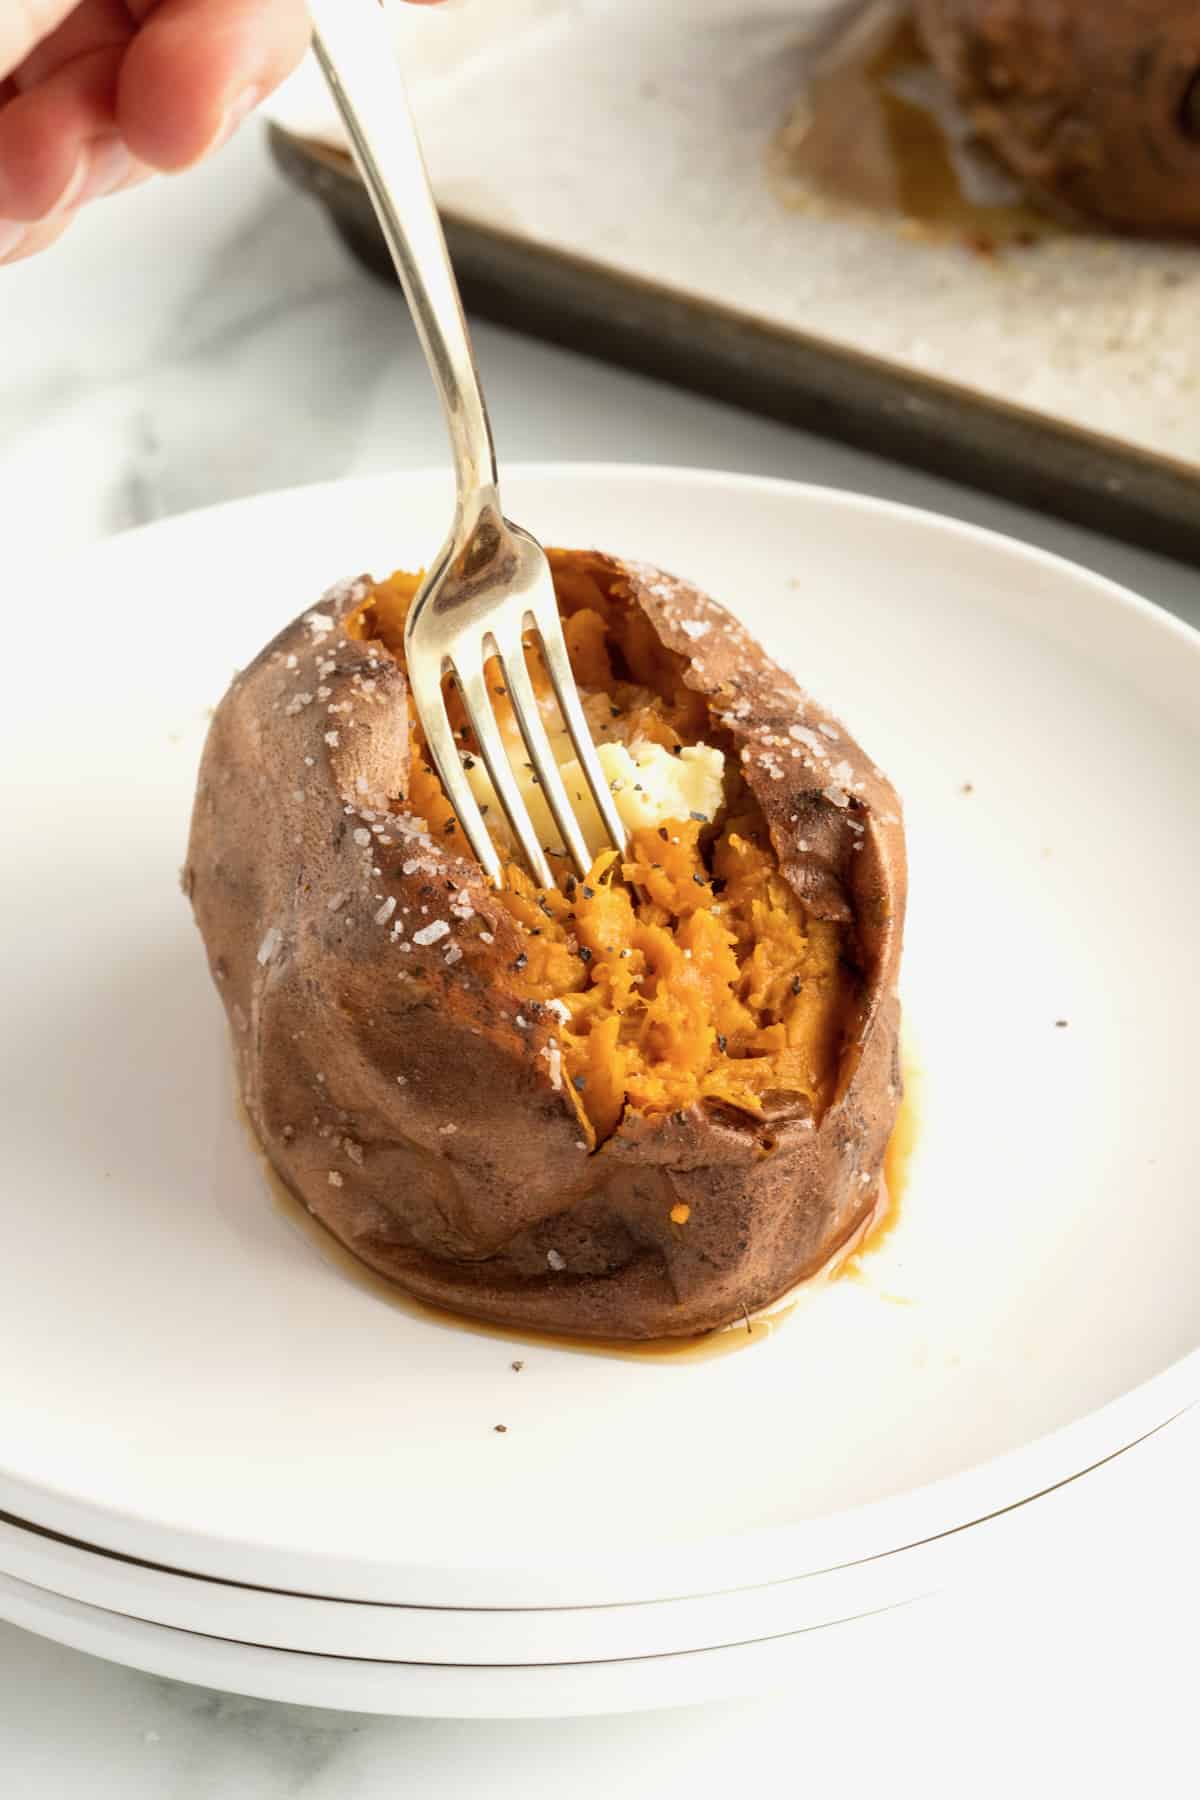 How to Bake a Sweet Potato by The BakerMama